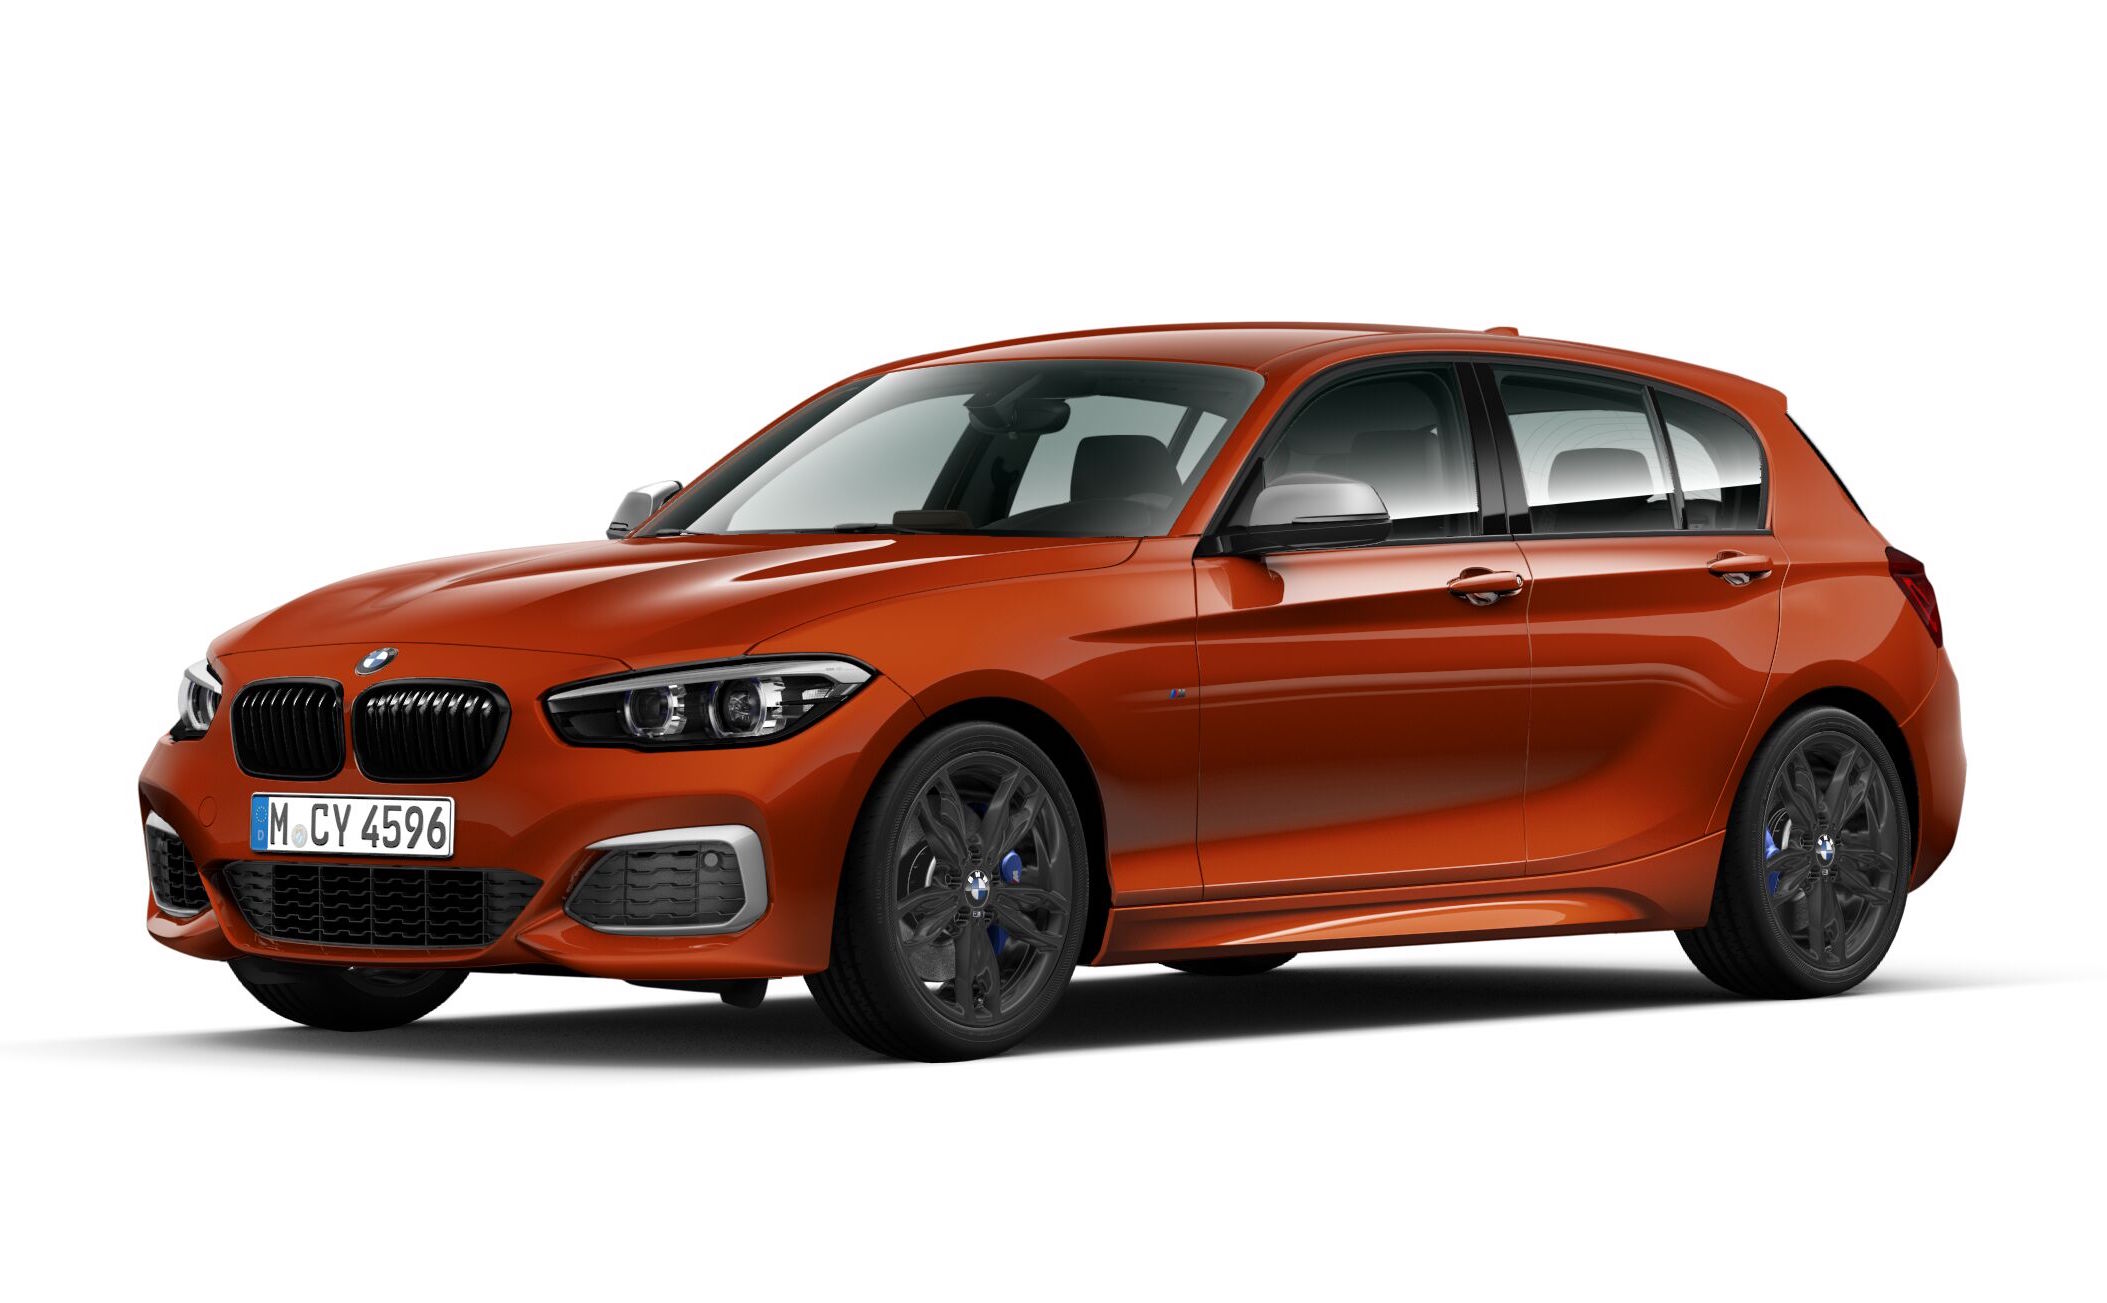 BMW M140i Finale Edition on sale in Australia from $62,990